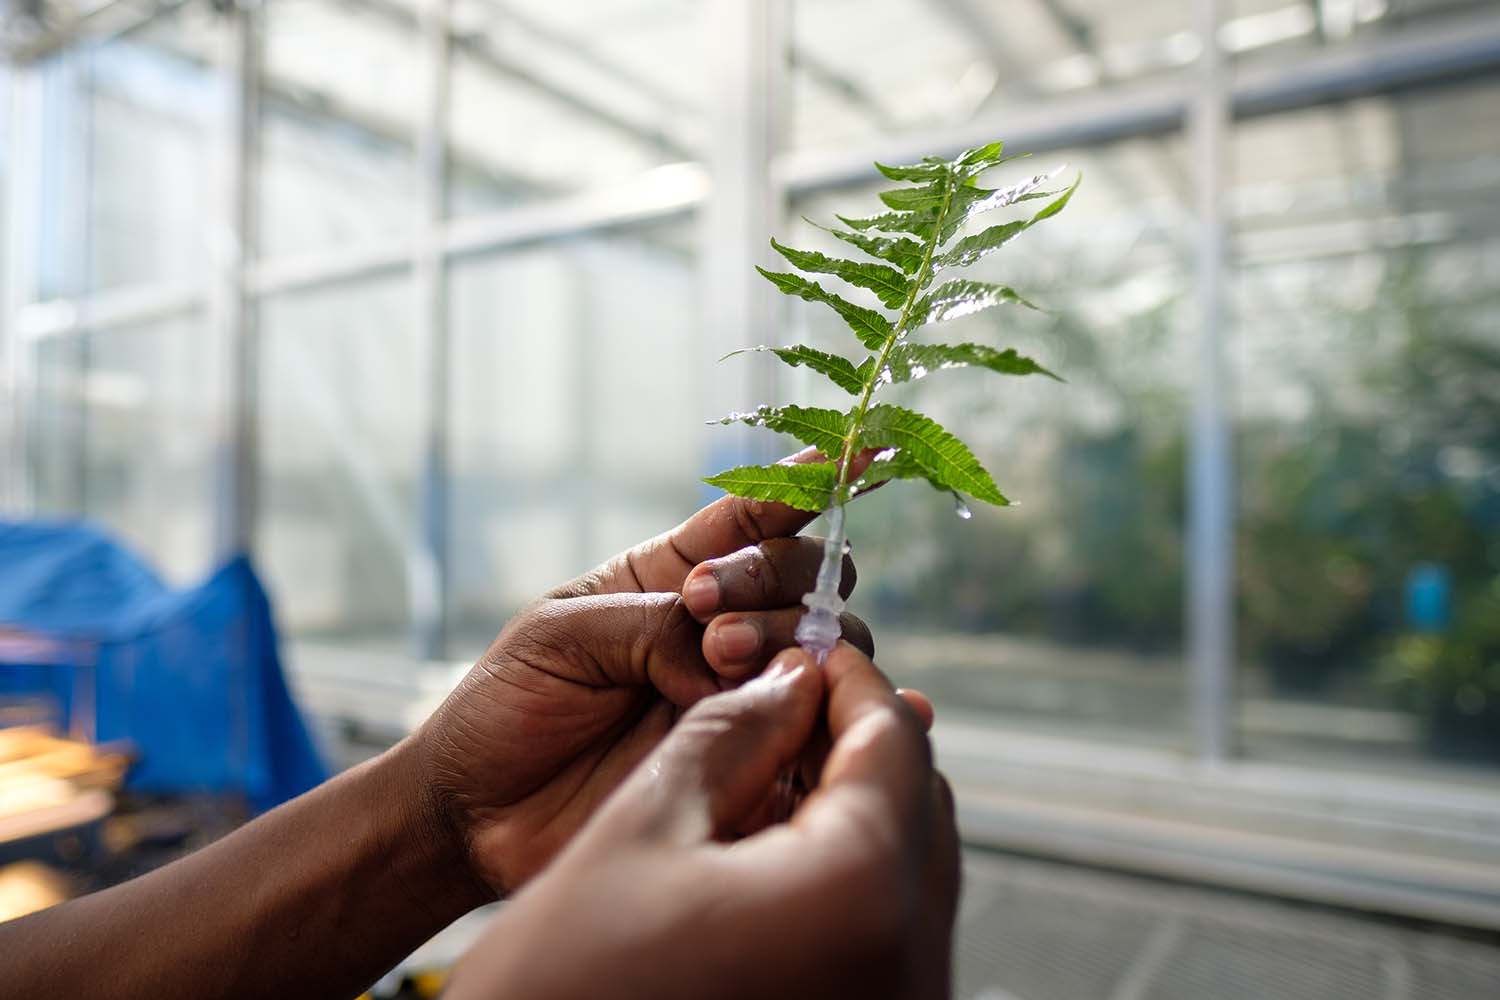 Shot of someone's hands holding a leaf and scientific tube to ensure that air bubbles are not accidentally introduced to the leaf’s vein networks